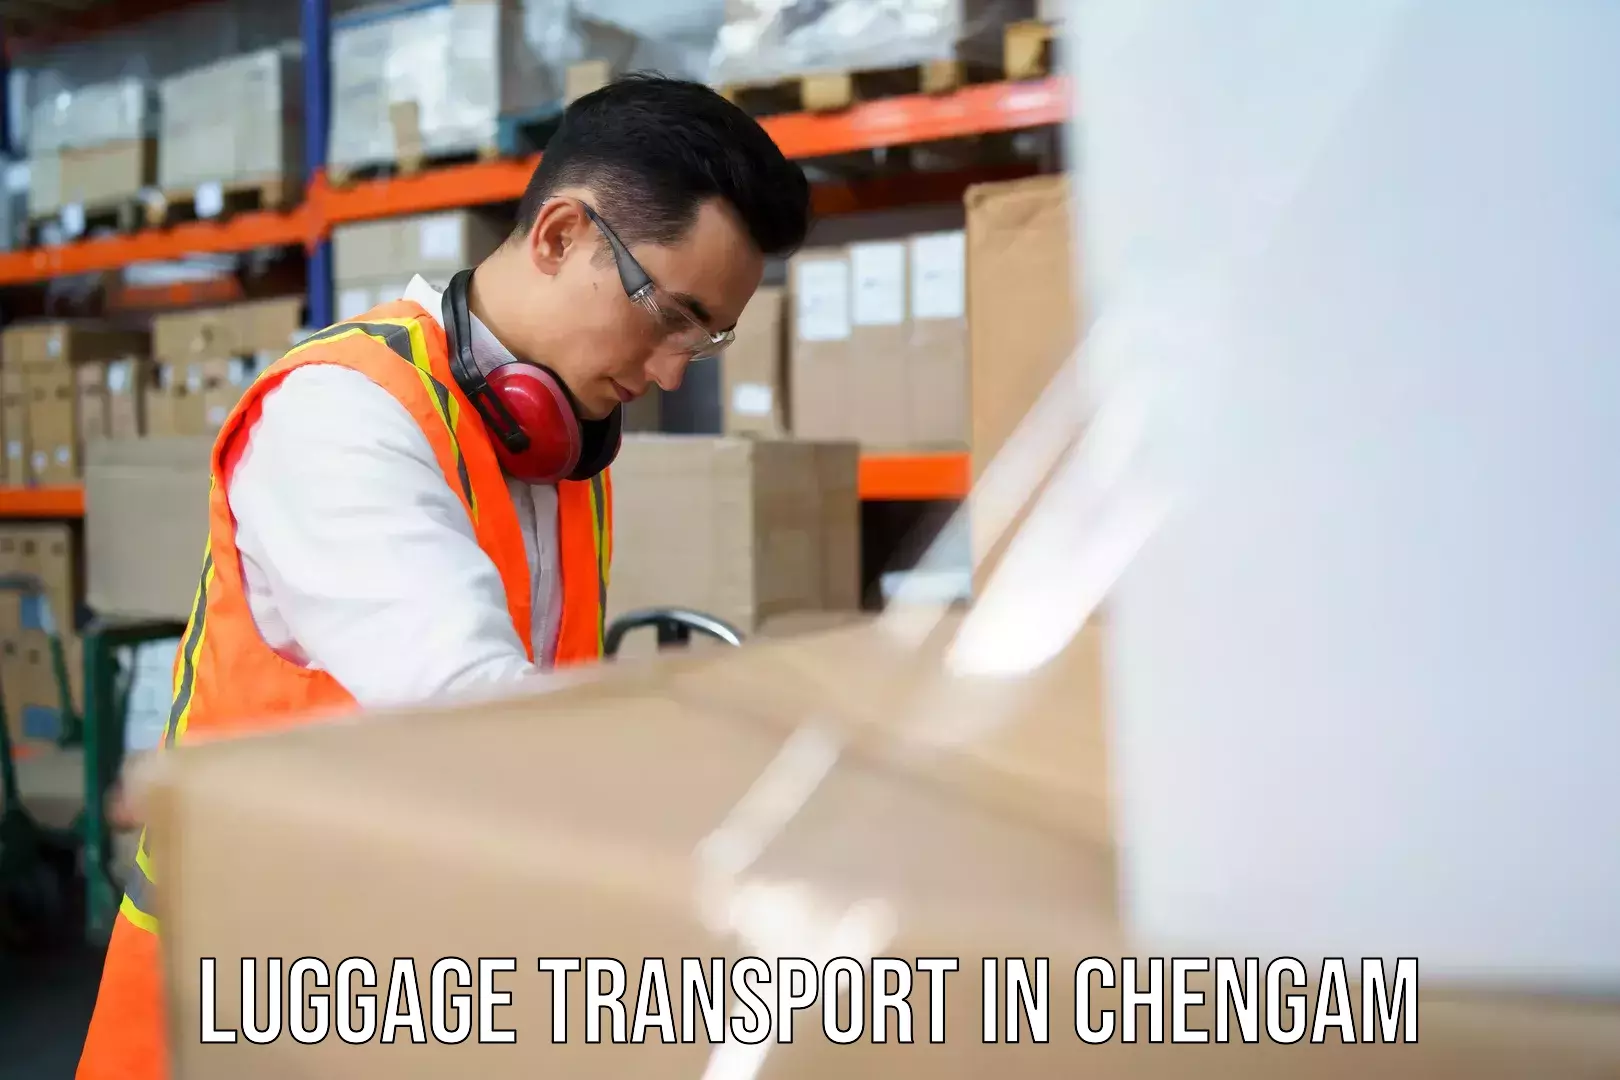 Timely baggage transport in Chengam